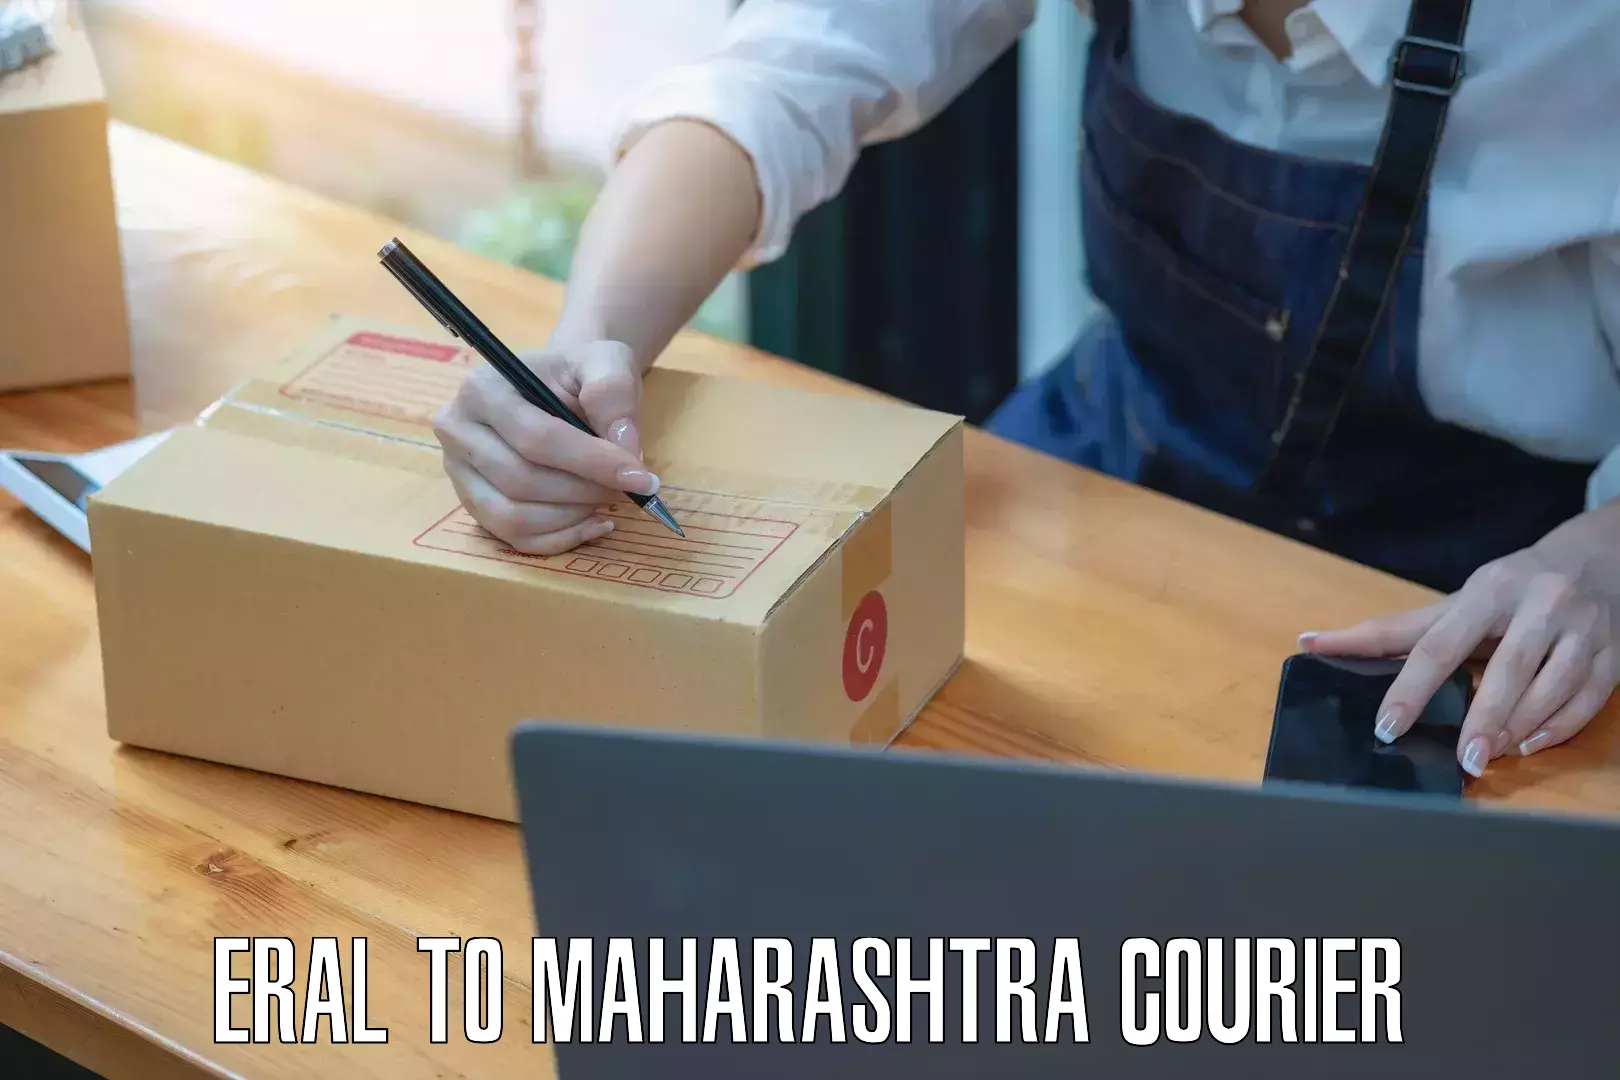 Courier service efficiency in Eral to Maharashtra